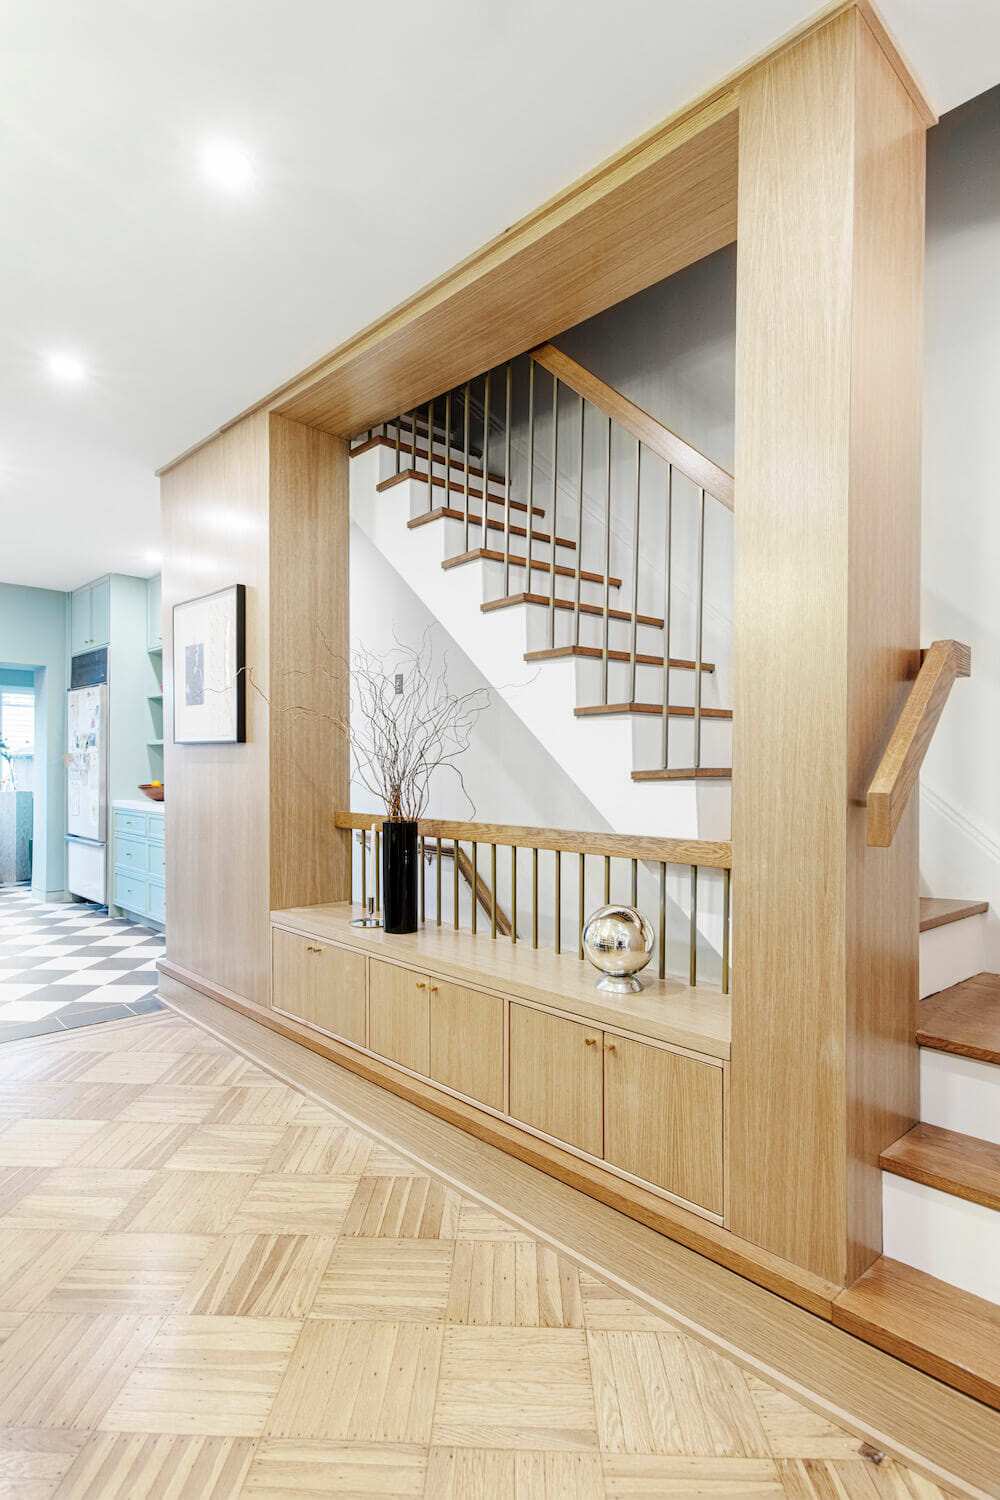 Image of an open stairway with custom storage